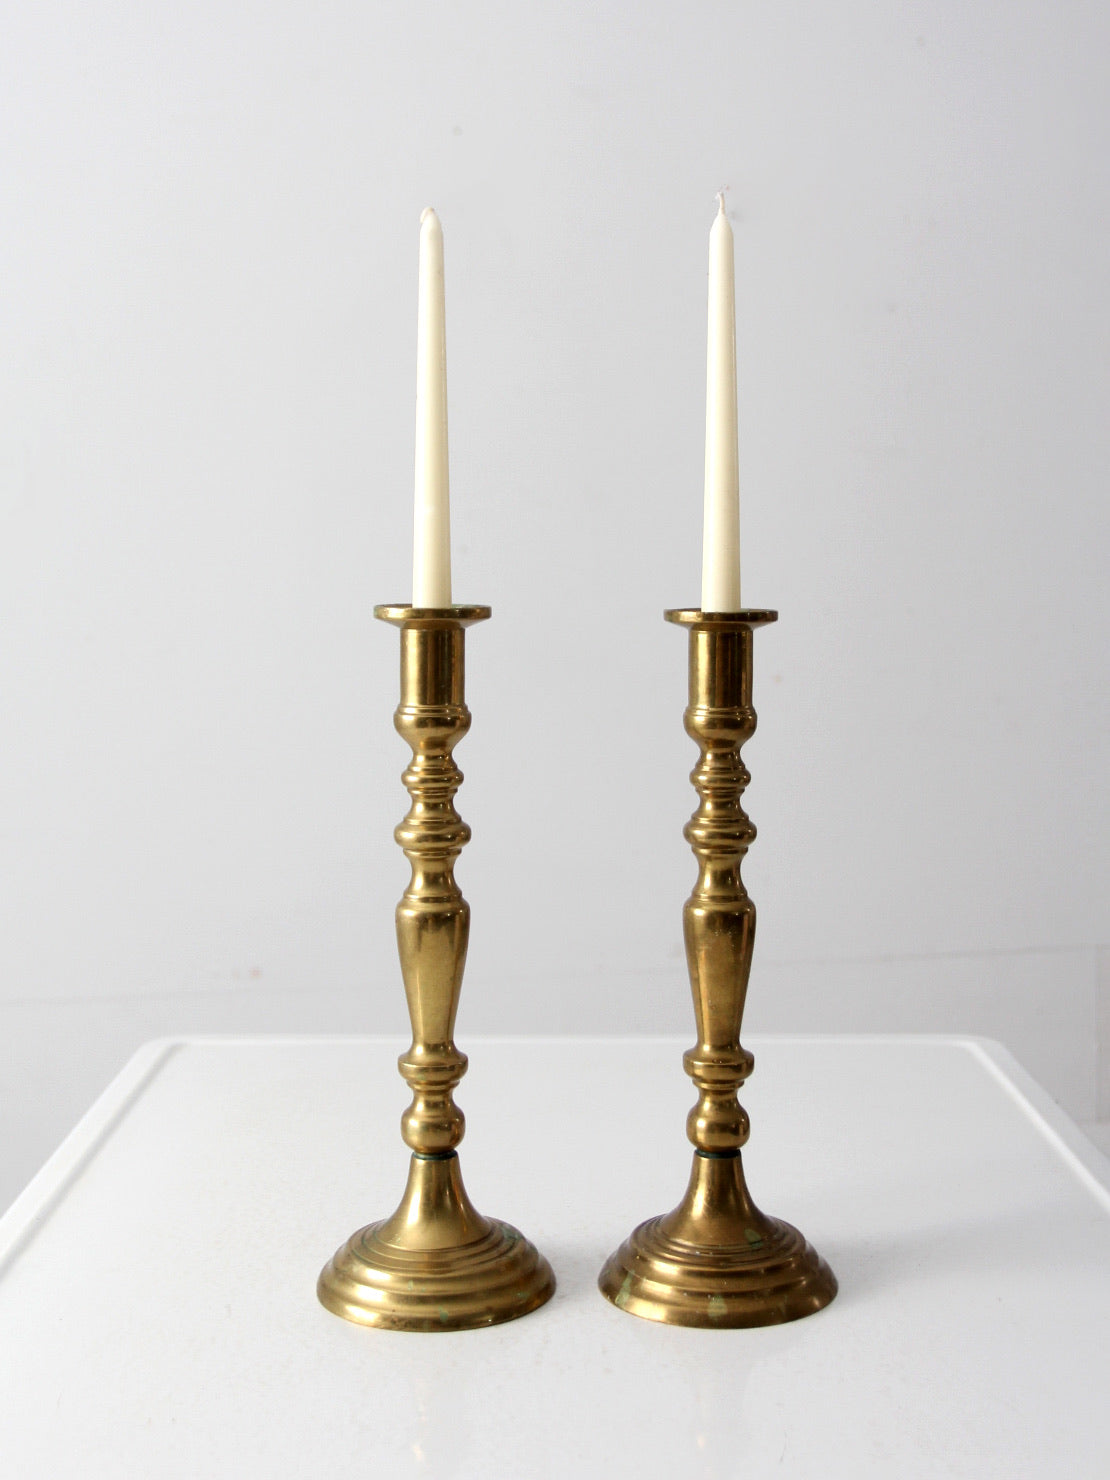 Short Brass Candle Holders, Pair of Small Candleholders, Patina